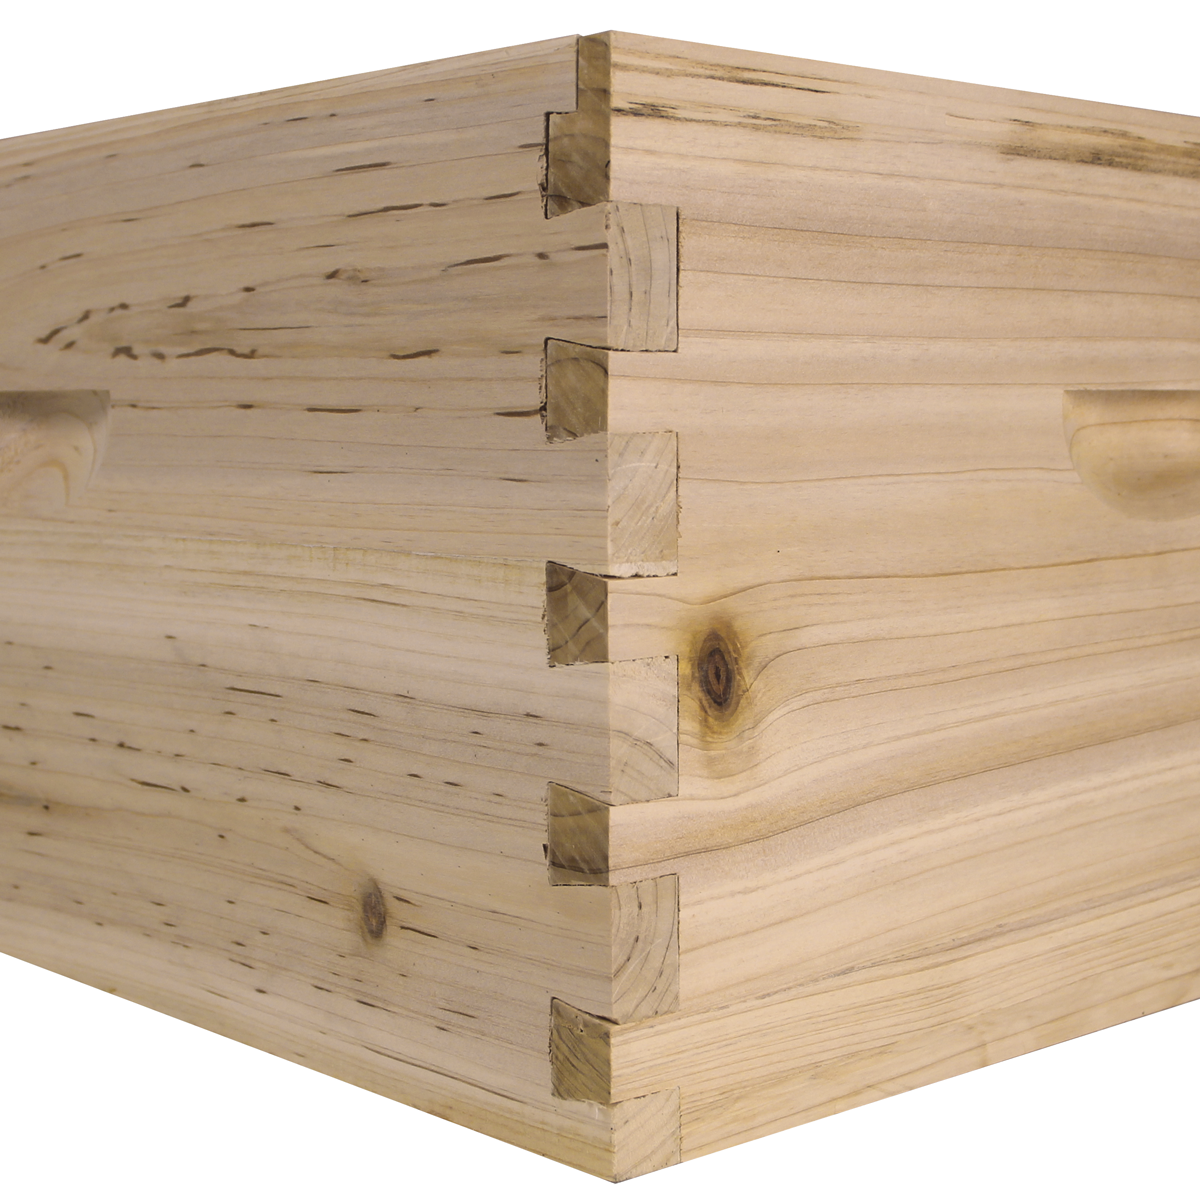 10 Frame Deep Brood Box w/ Dovetail Joints (Painted & Assembled)